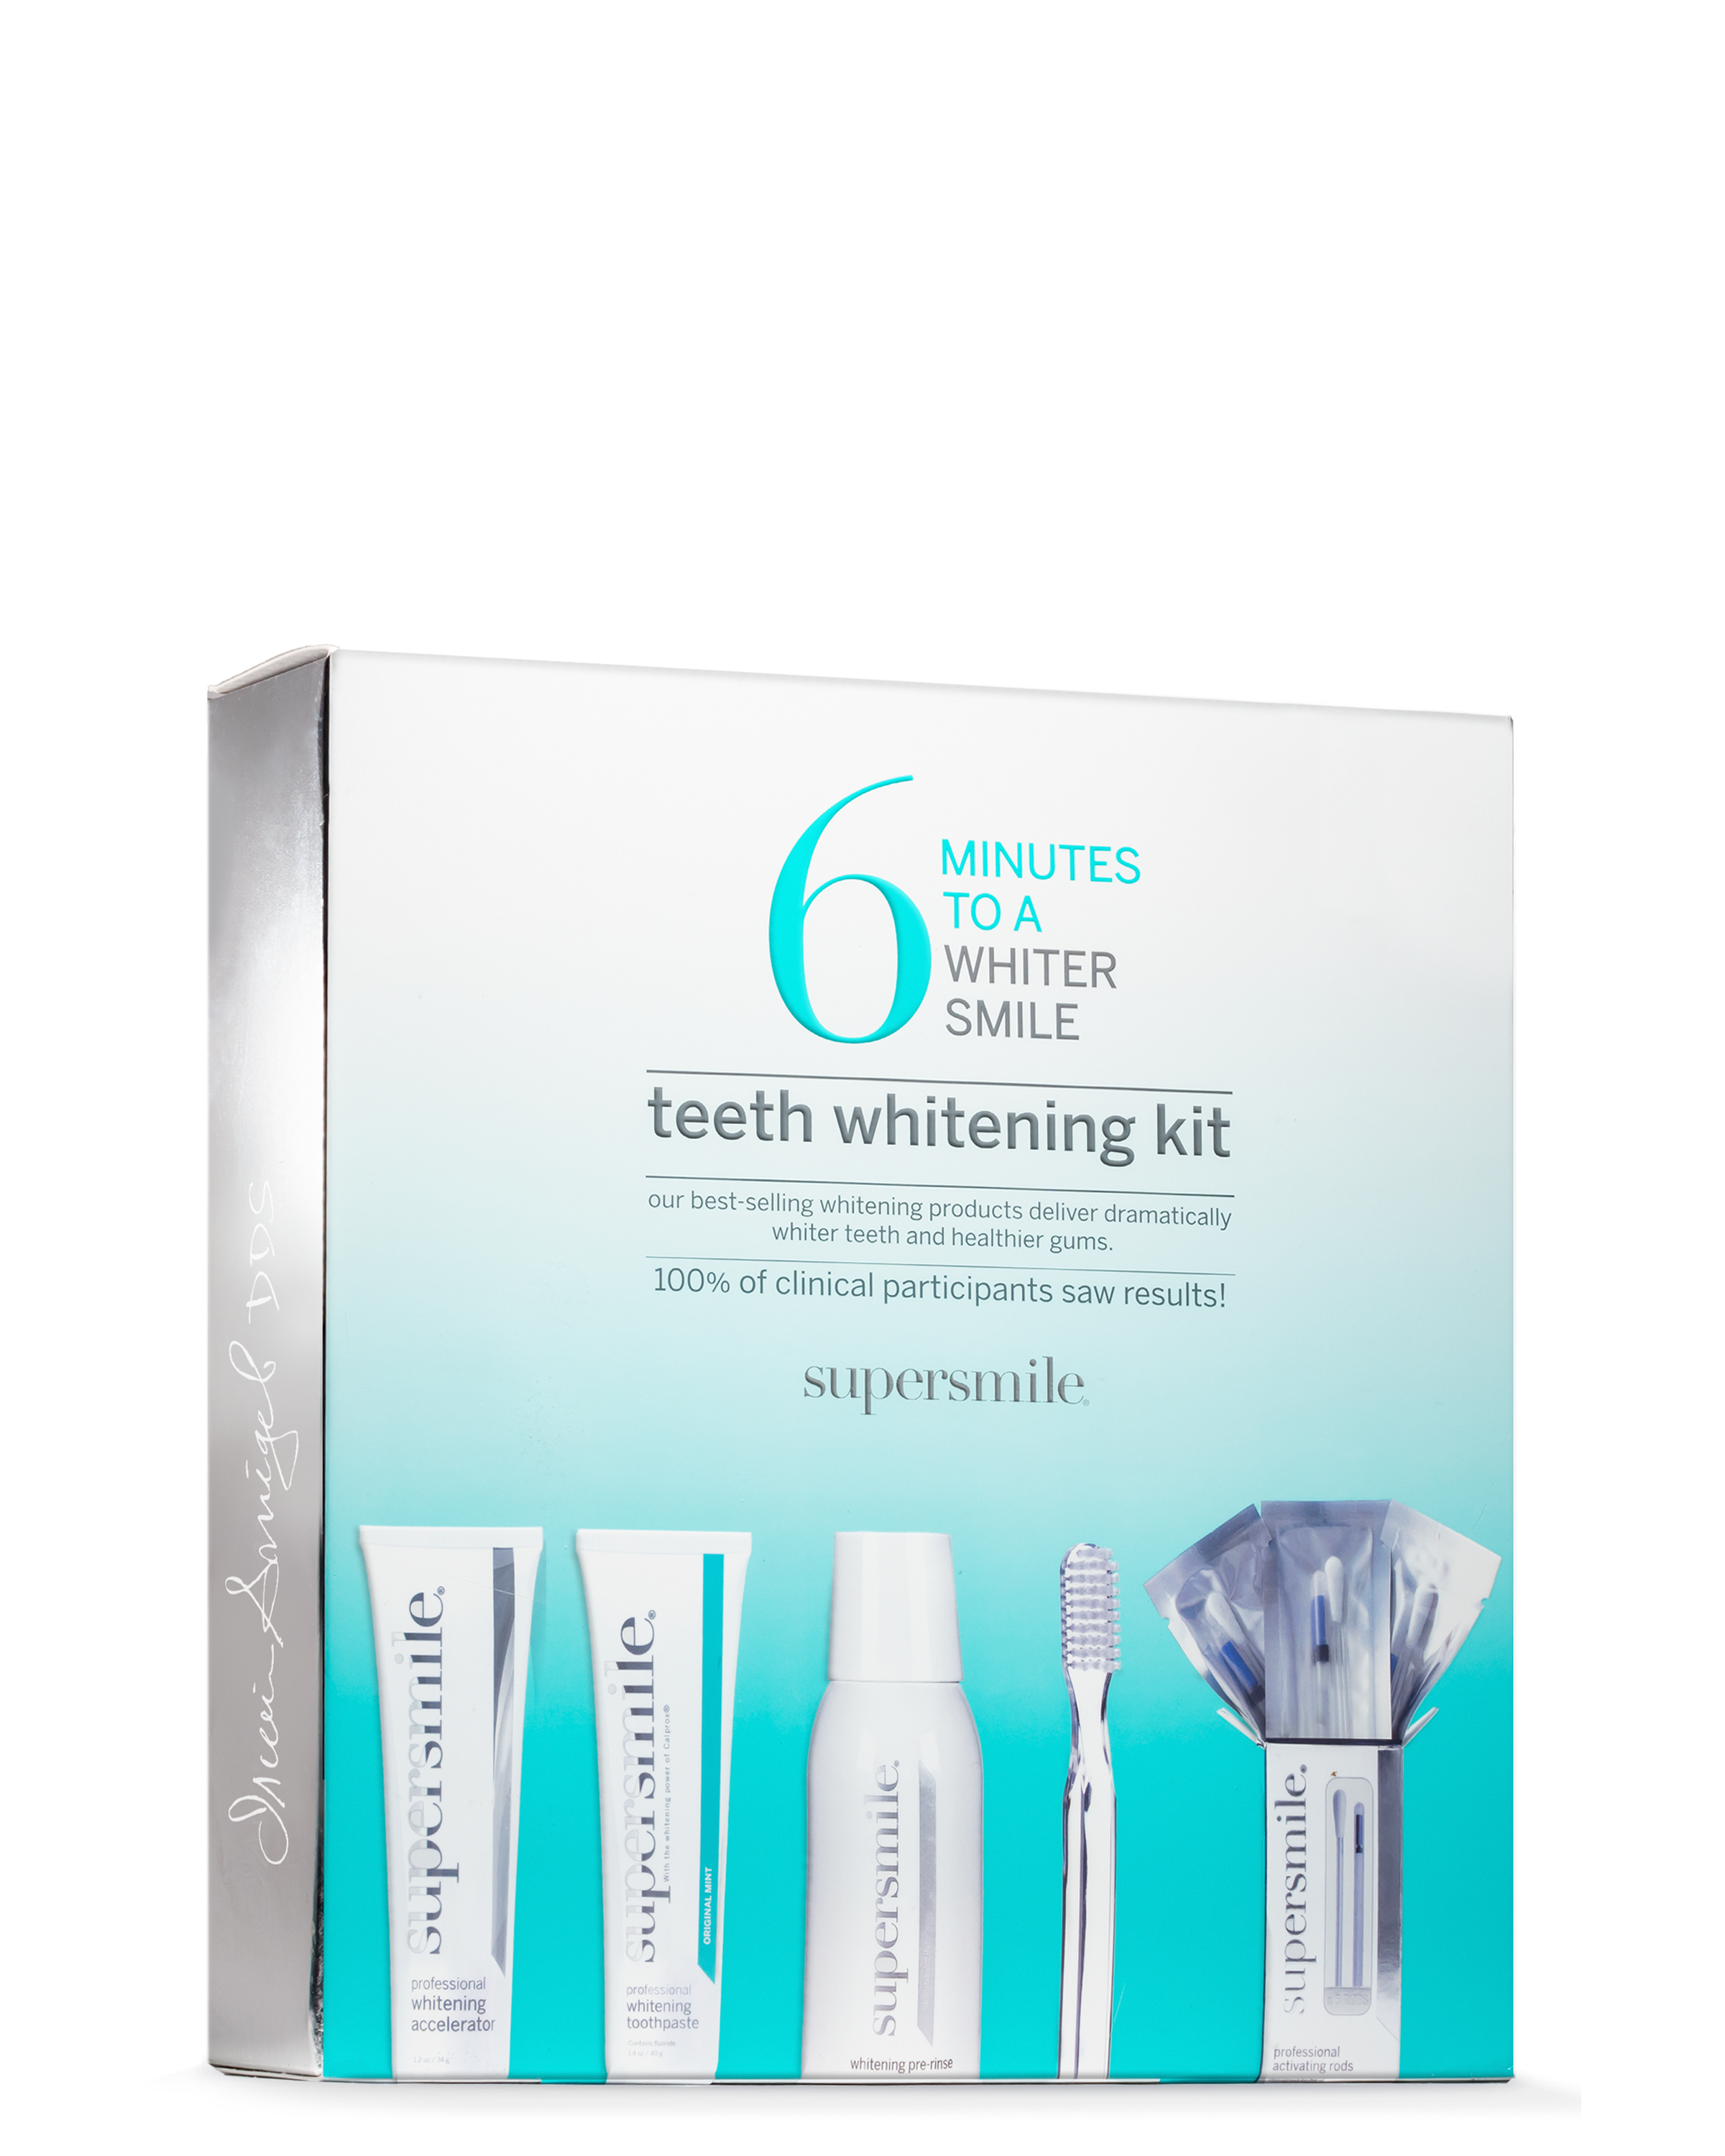 6 Minutes to a Whiter Smile Teeth Whitening Box Side 